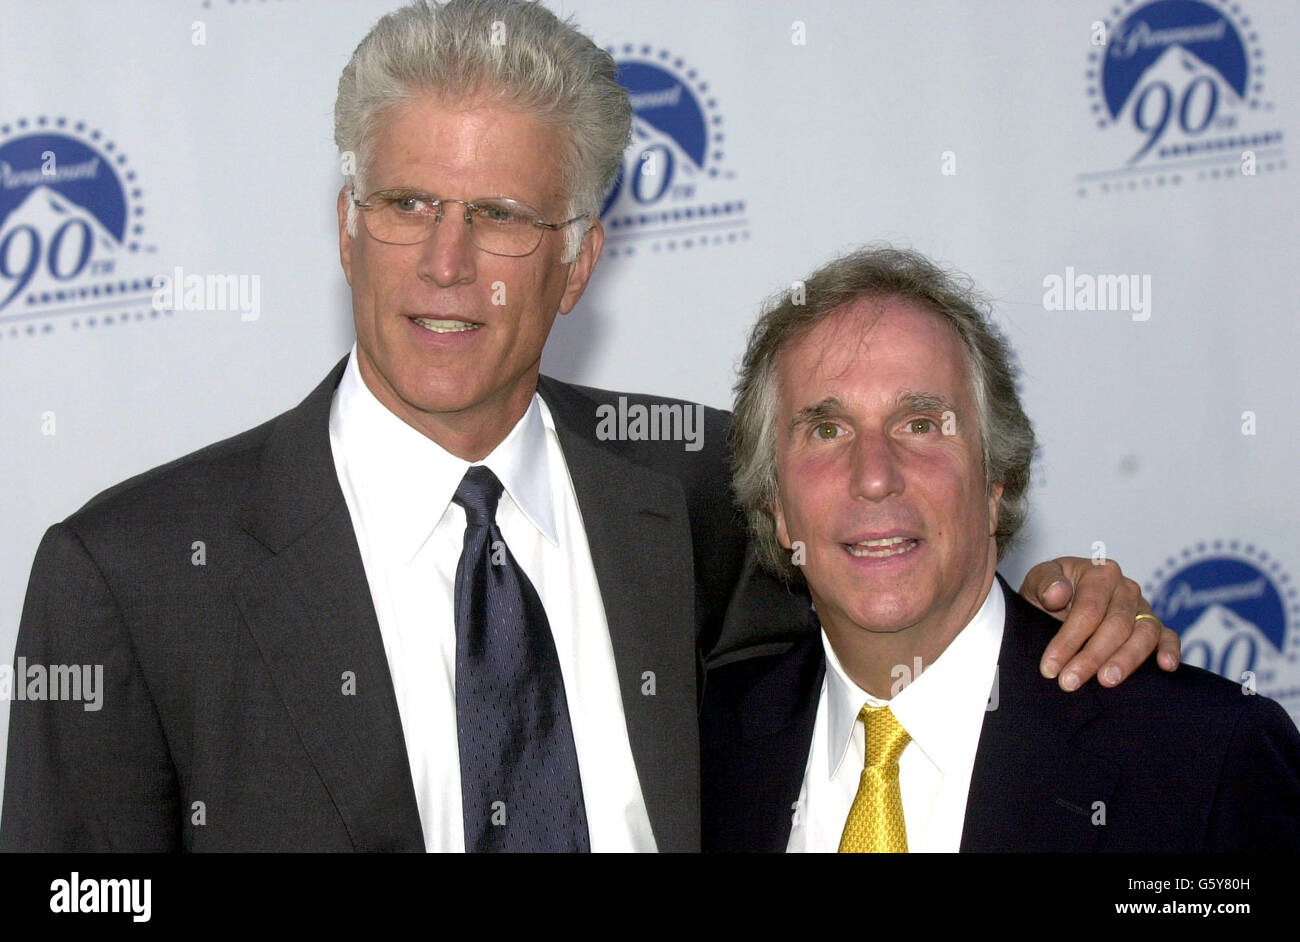 Actors Ted Danson (left) and Henry Winkler arrives for the Paramount Pictures 90th Anniversary party in Los Angeles. Stock Photo